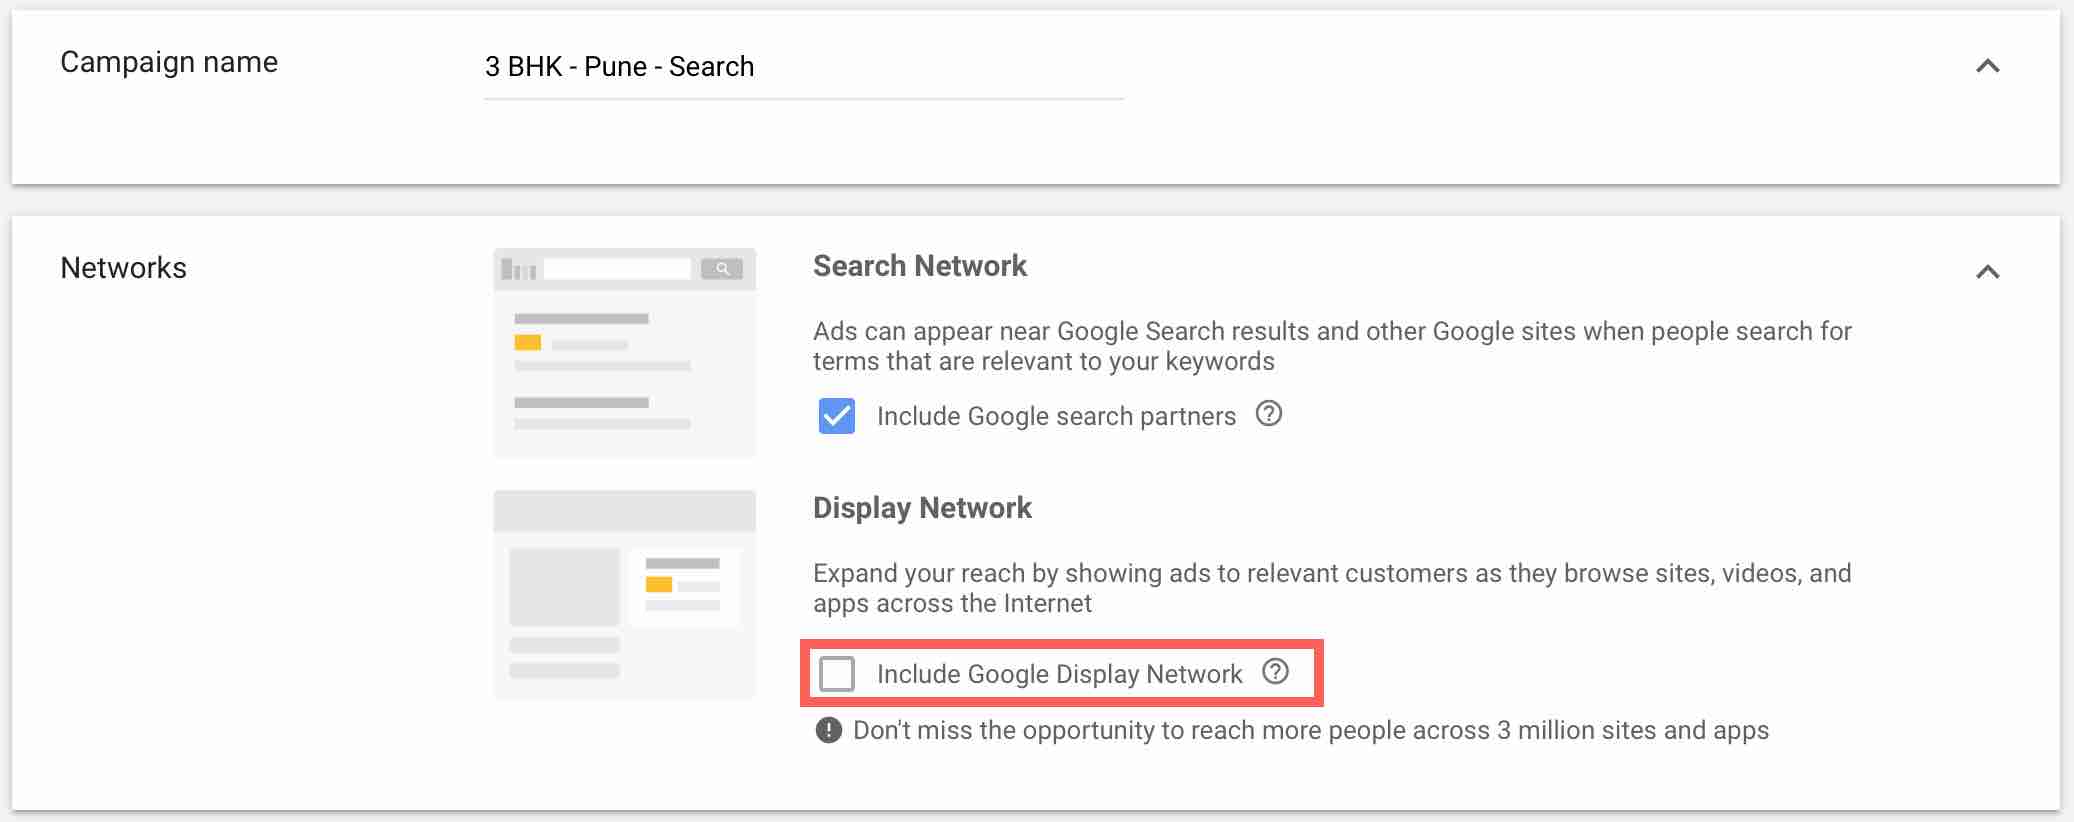 Network Selection in Google Ads